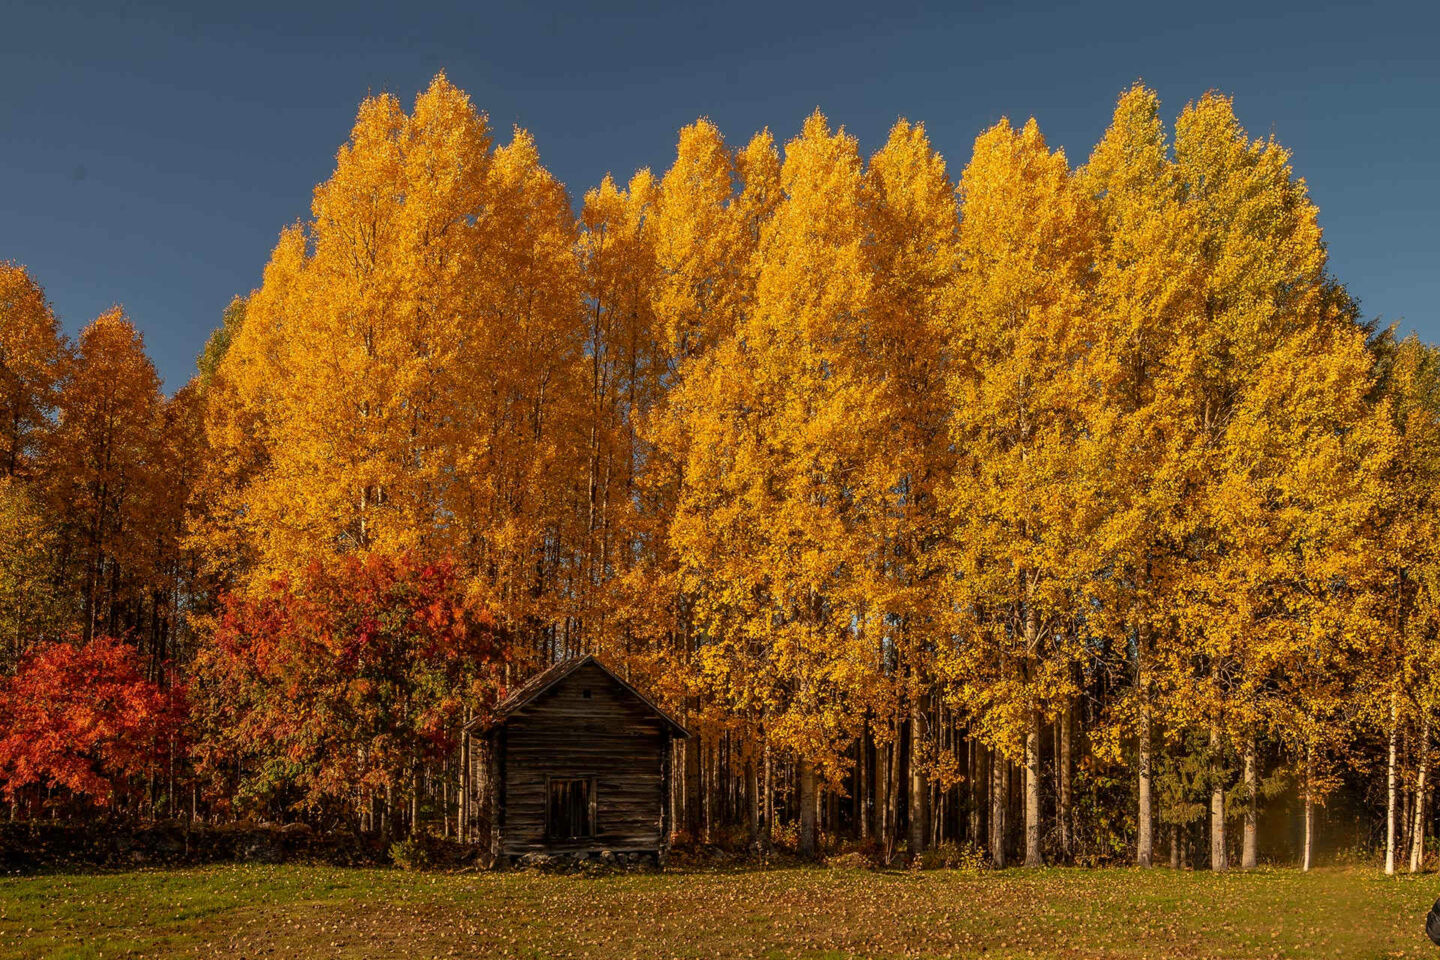 Autumn colors in Ranua, a feature of filming in Finnish Lapland locations